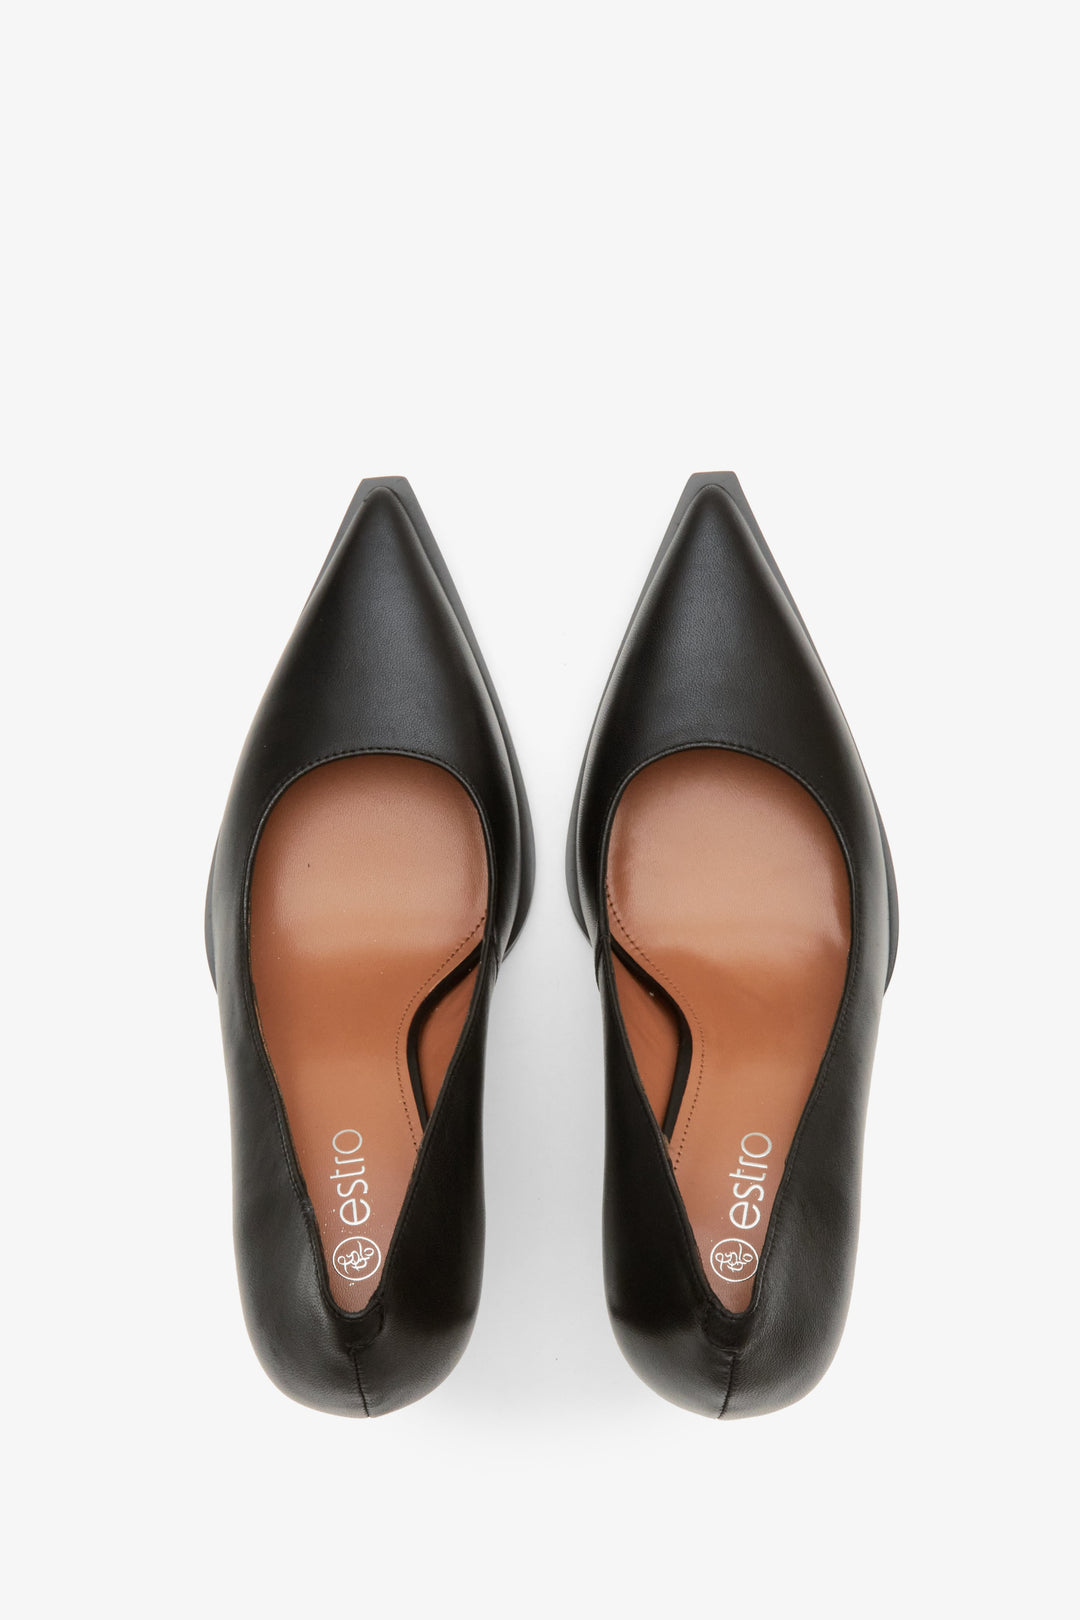 Women's black pointed-toe pumps made of genuine leather by Estro - top view presentation of the model.